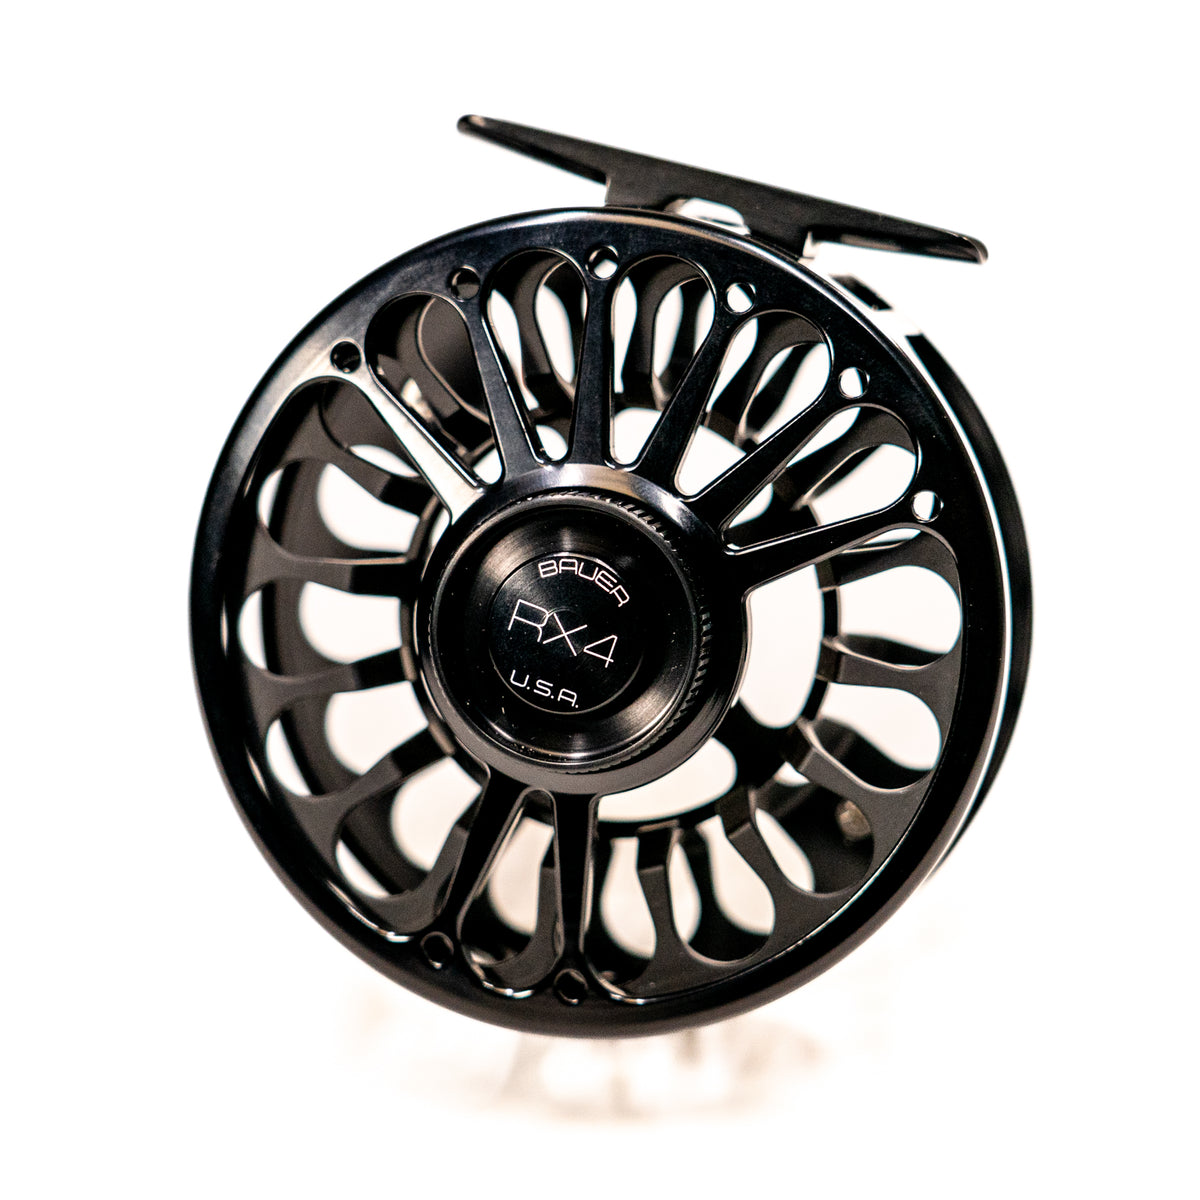 Hardy 1912 Perfect Fly Reel - The Compleat Angler